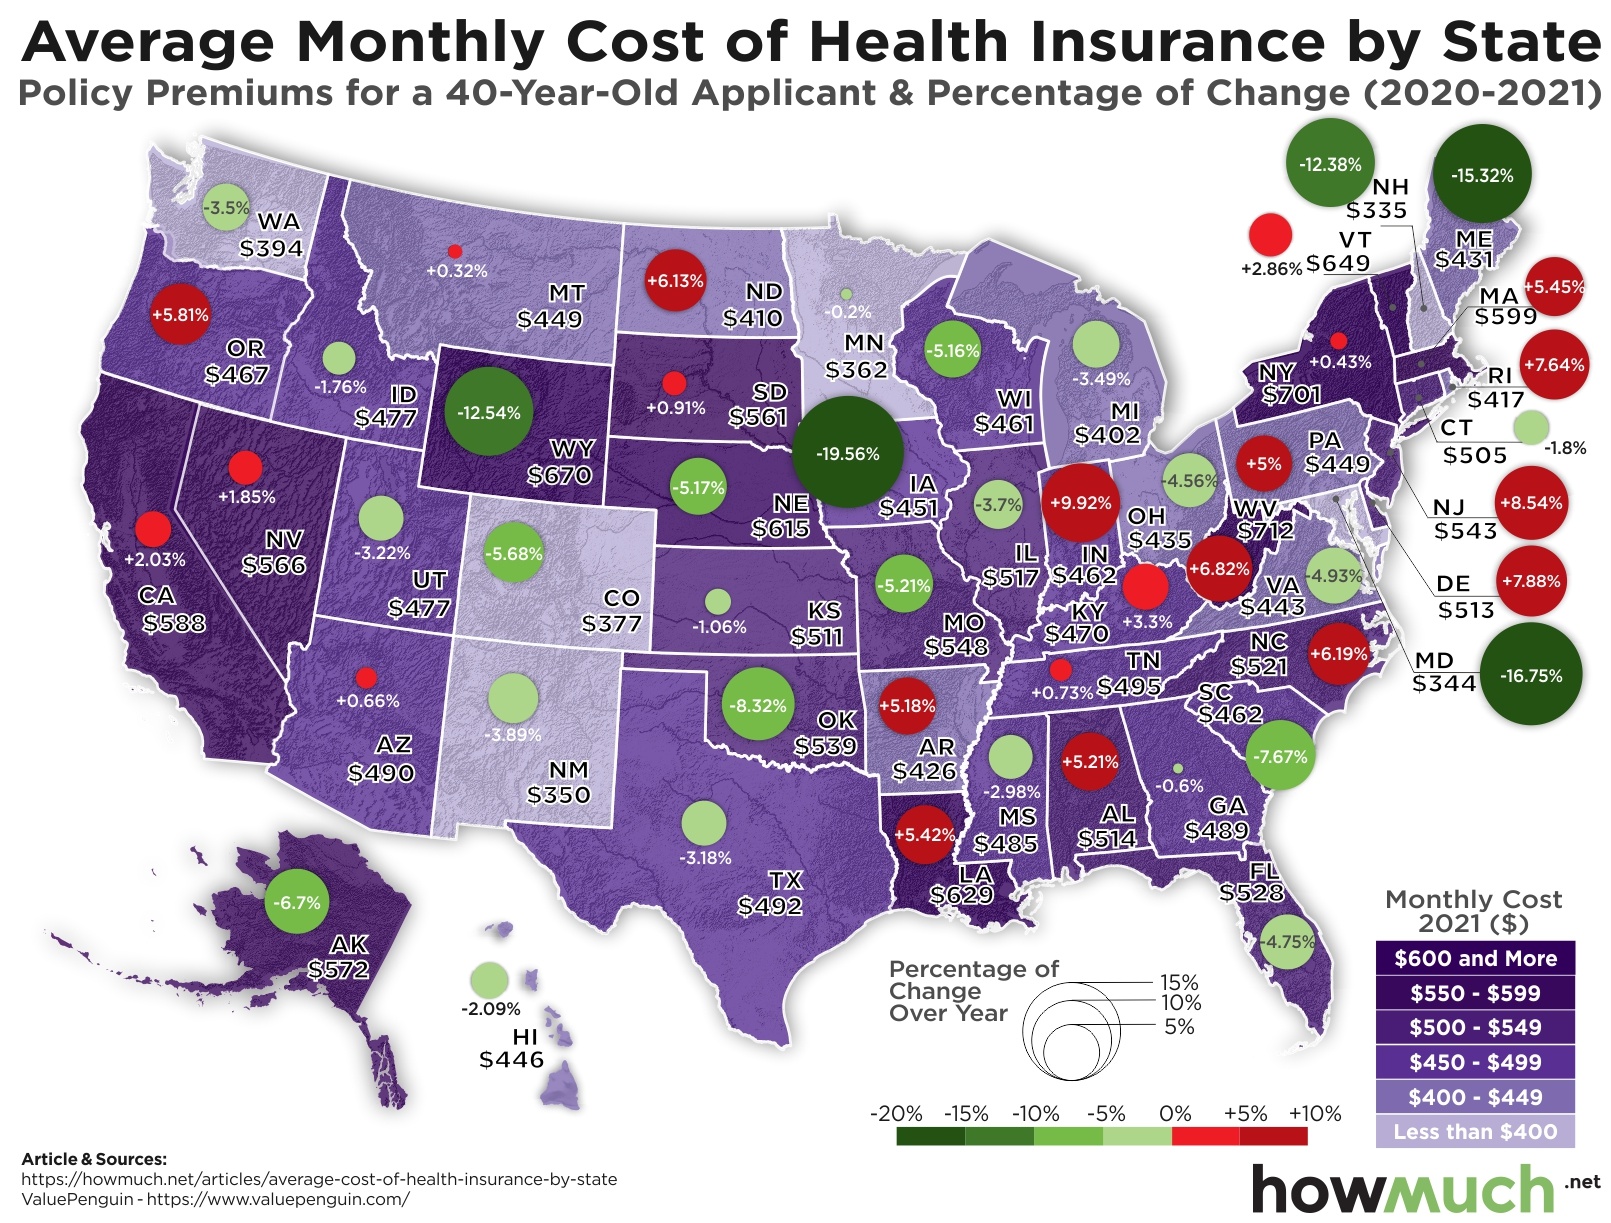 Average monthly cost of health insurance by U.S. state: policy premiums for a 40-year-old applicant and percent change, 2020-2021. Graphic: HowMuch.net